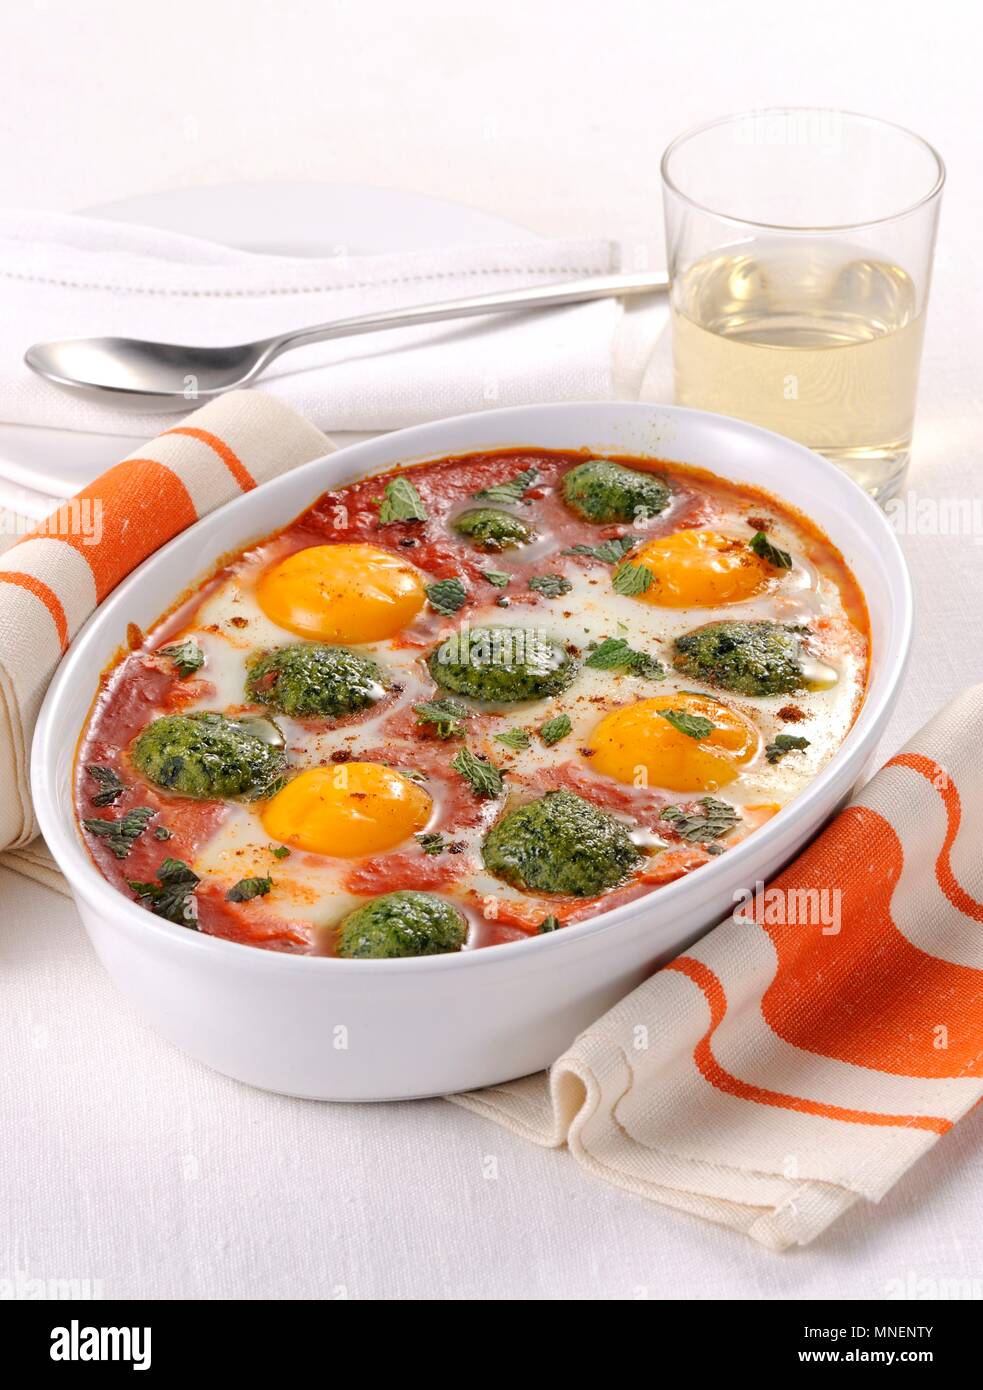 Spinach and egg bake Stock Photo